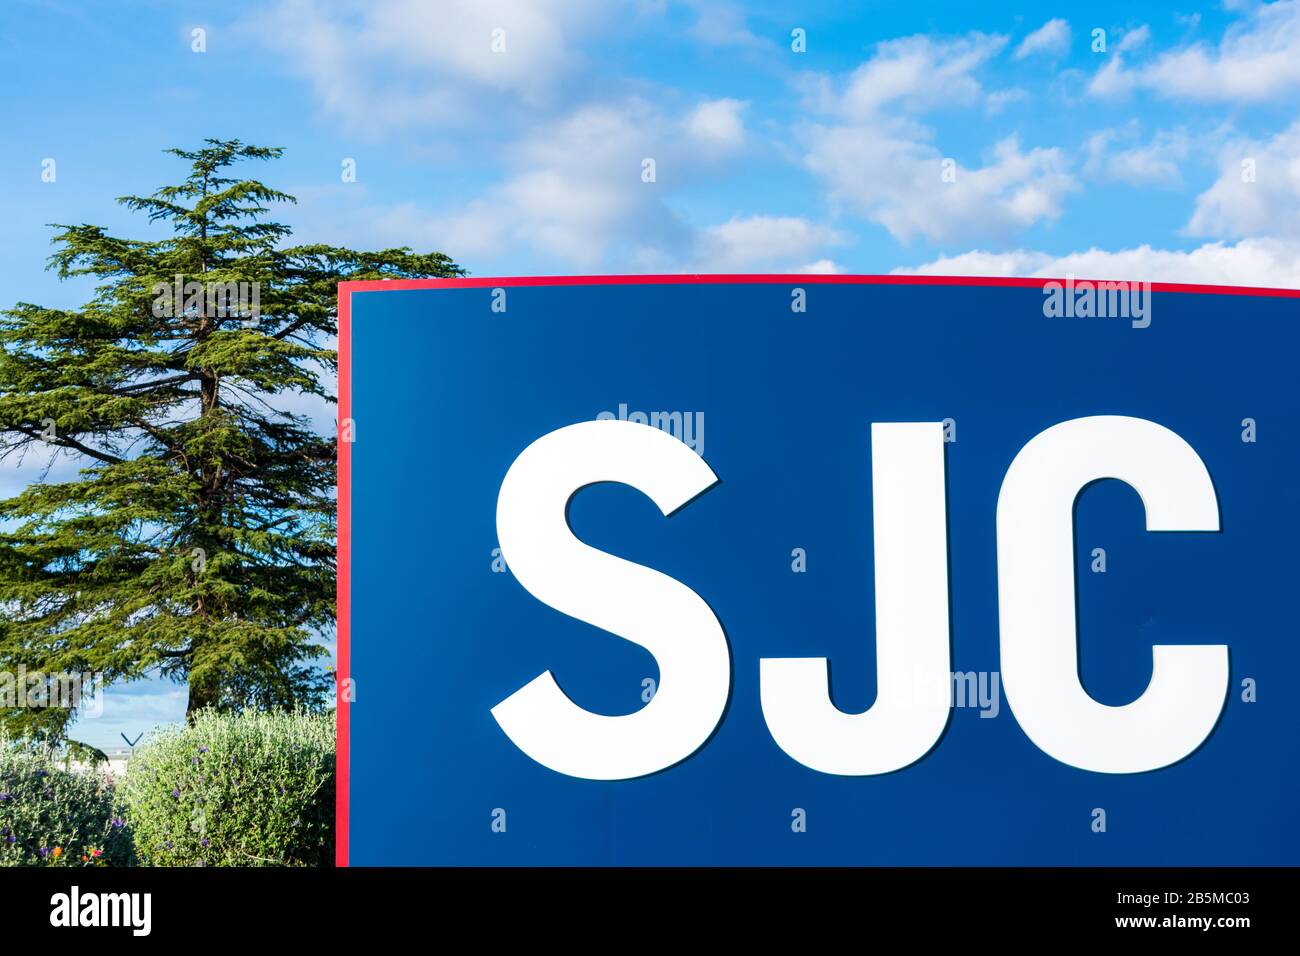 SJC sign advertises Norman Y. Mineta San Jose International Airport, a city-owned public airport, near the entrance to the airport facilities - San Jo Stock Photo